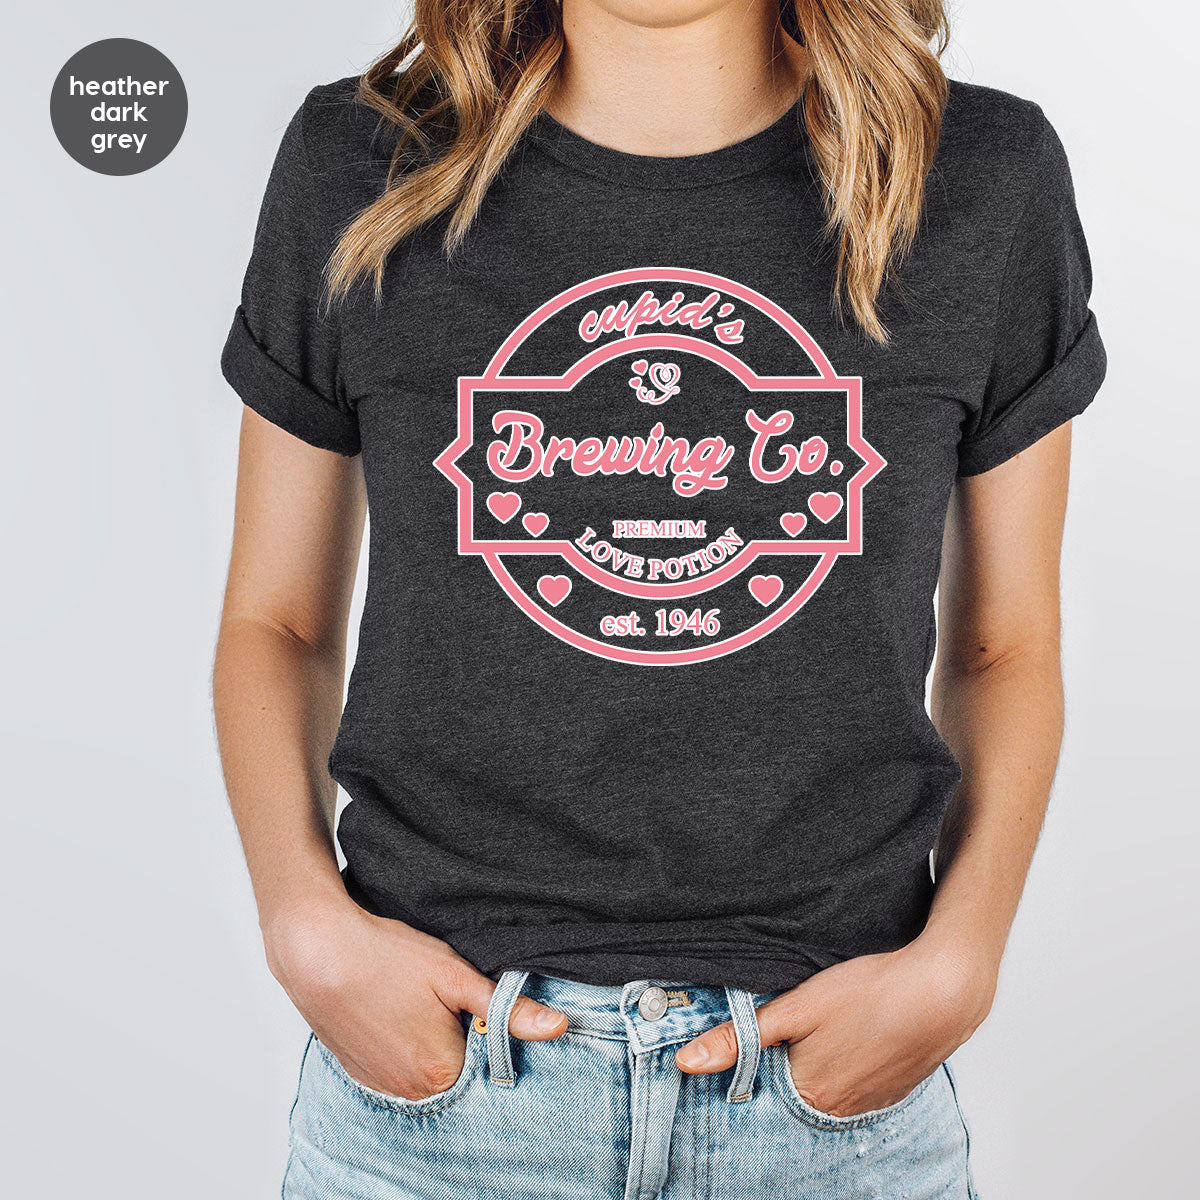 Valentine's Day Shirt, Love Poison T-Shirt, Brewing Co. Tee